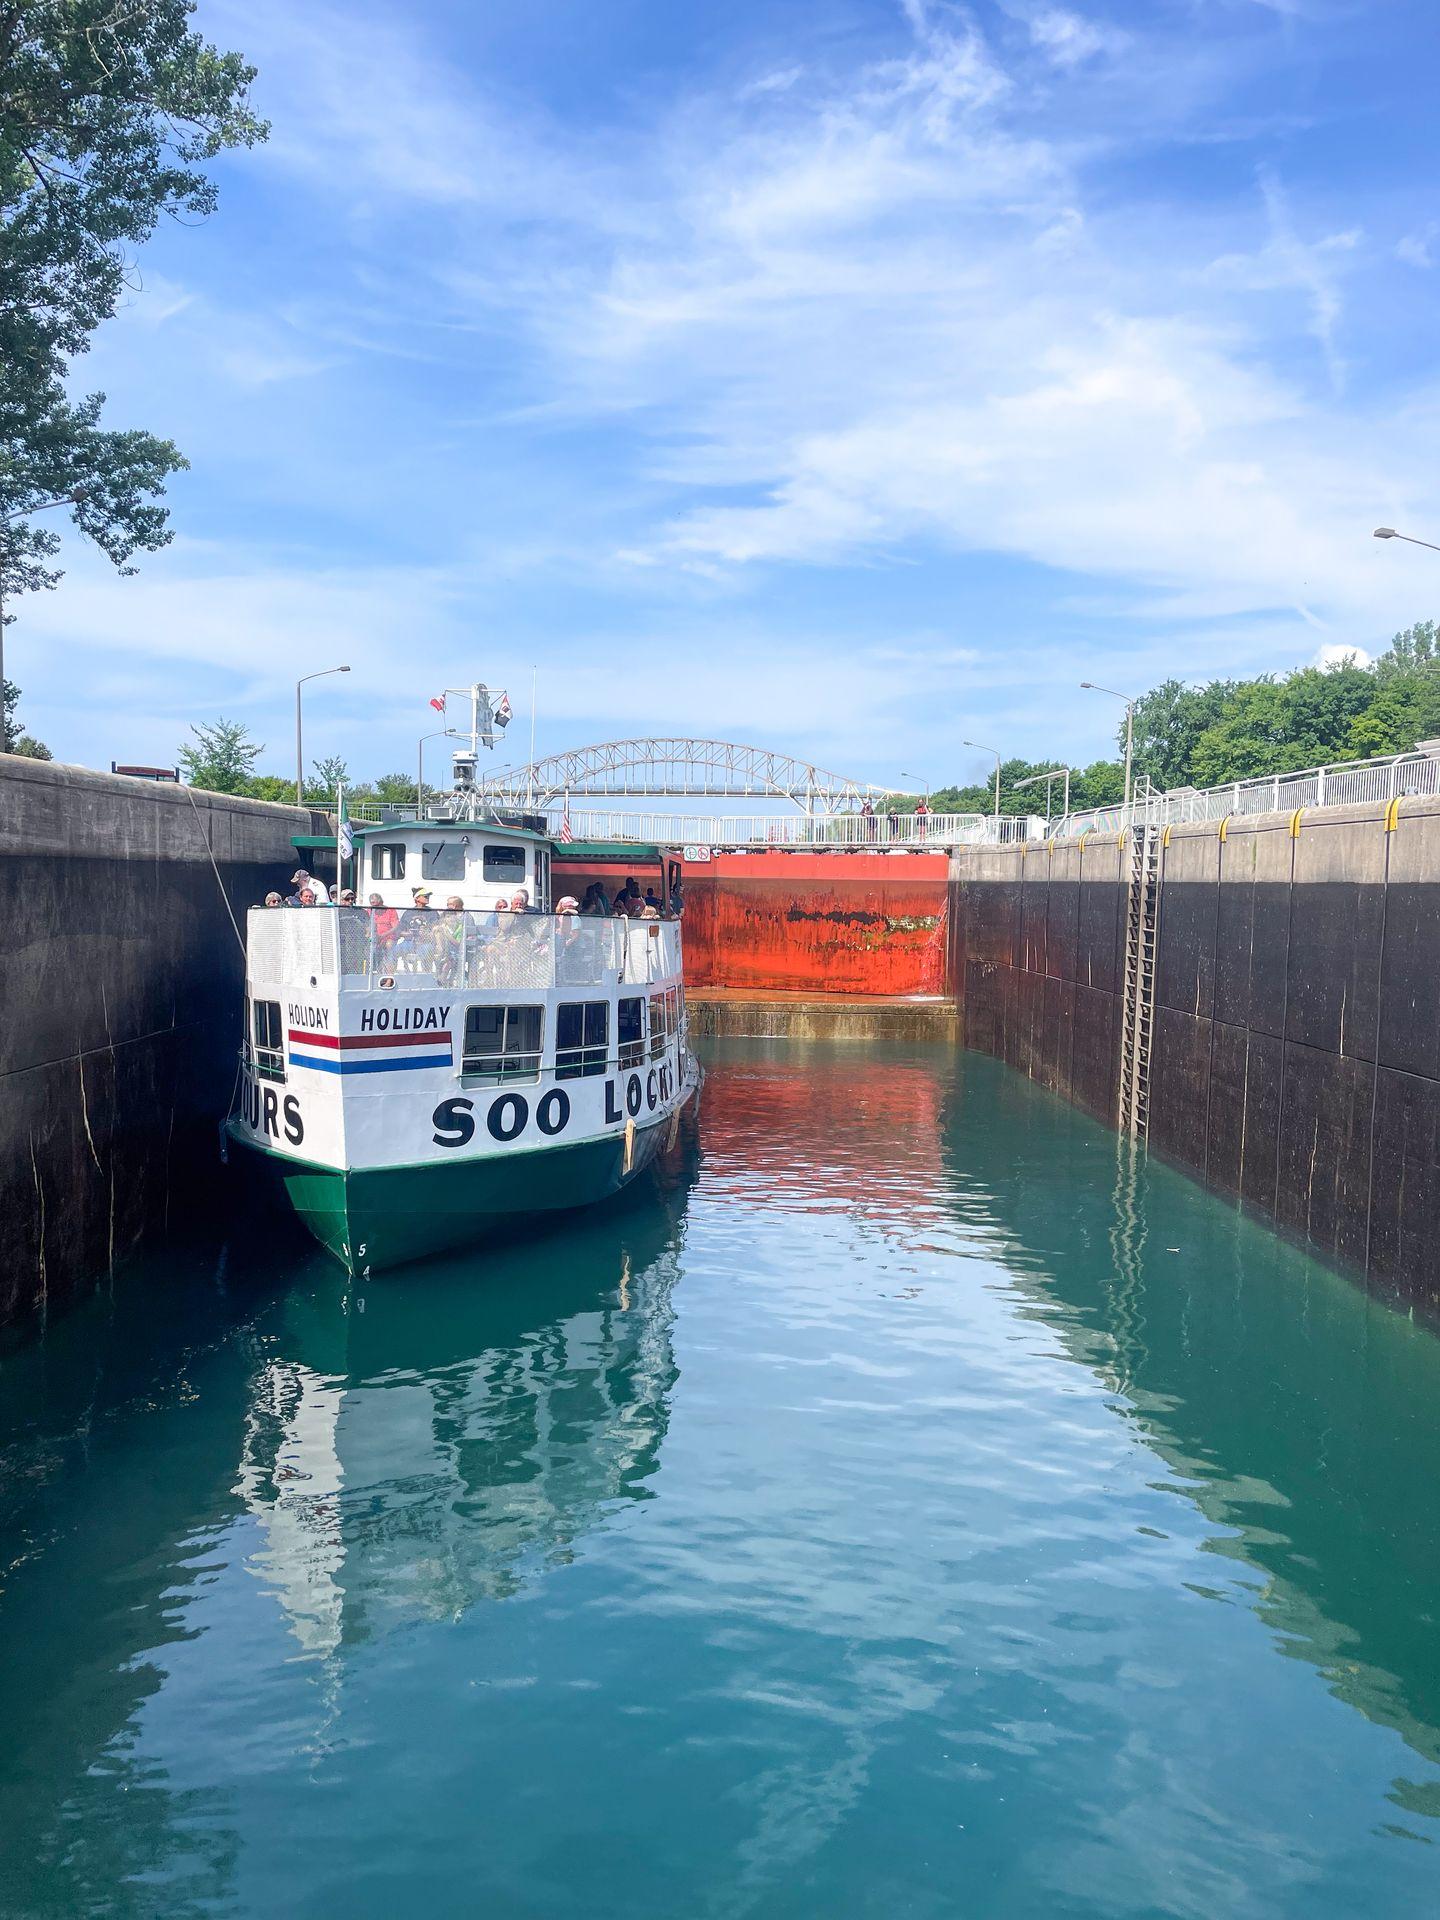 A boat that reads "Soo Lock" waits for the water to fill up the lock